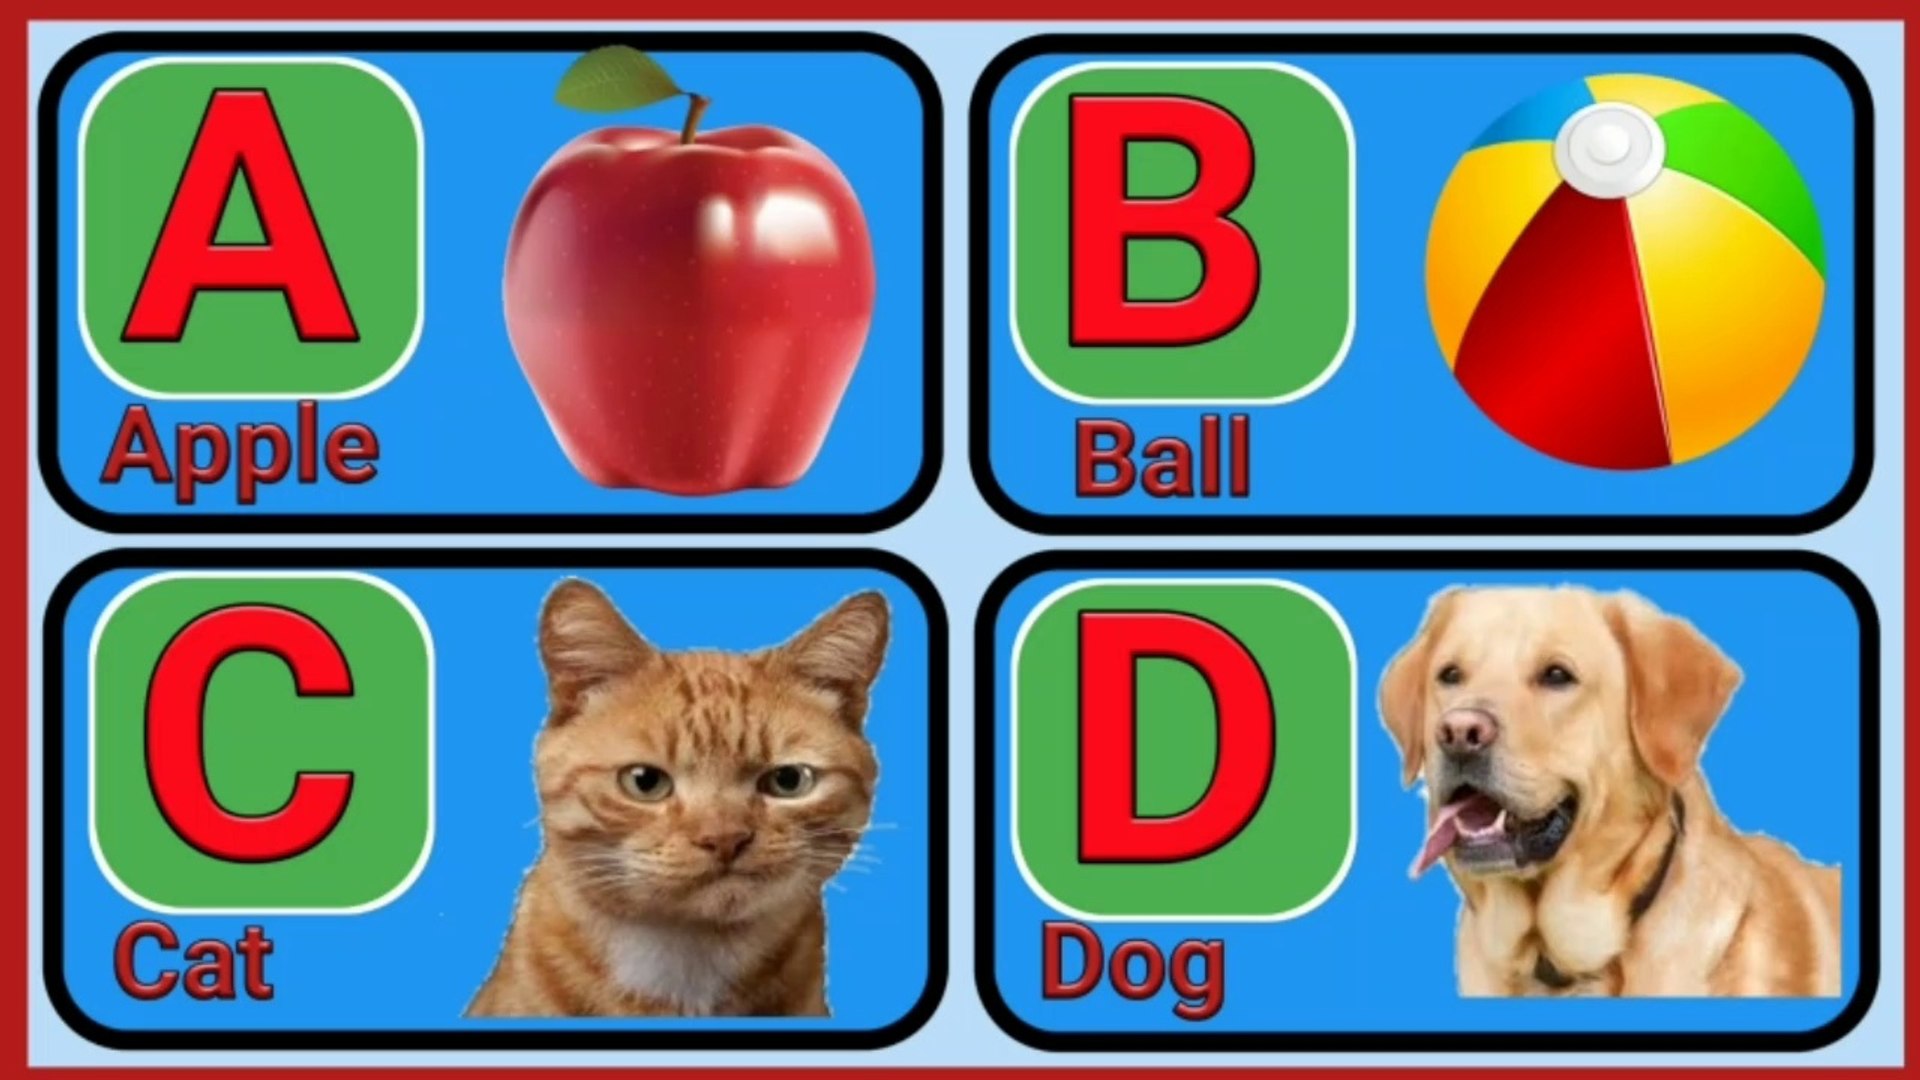 A For Apple A For Apple B For Badka Apple A For Apple B For Ball C For Cat A For Apple B For Ball C For Cat D For Dog A